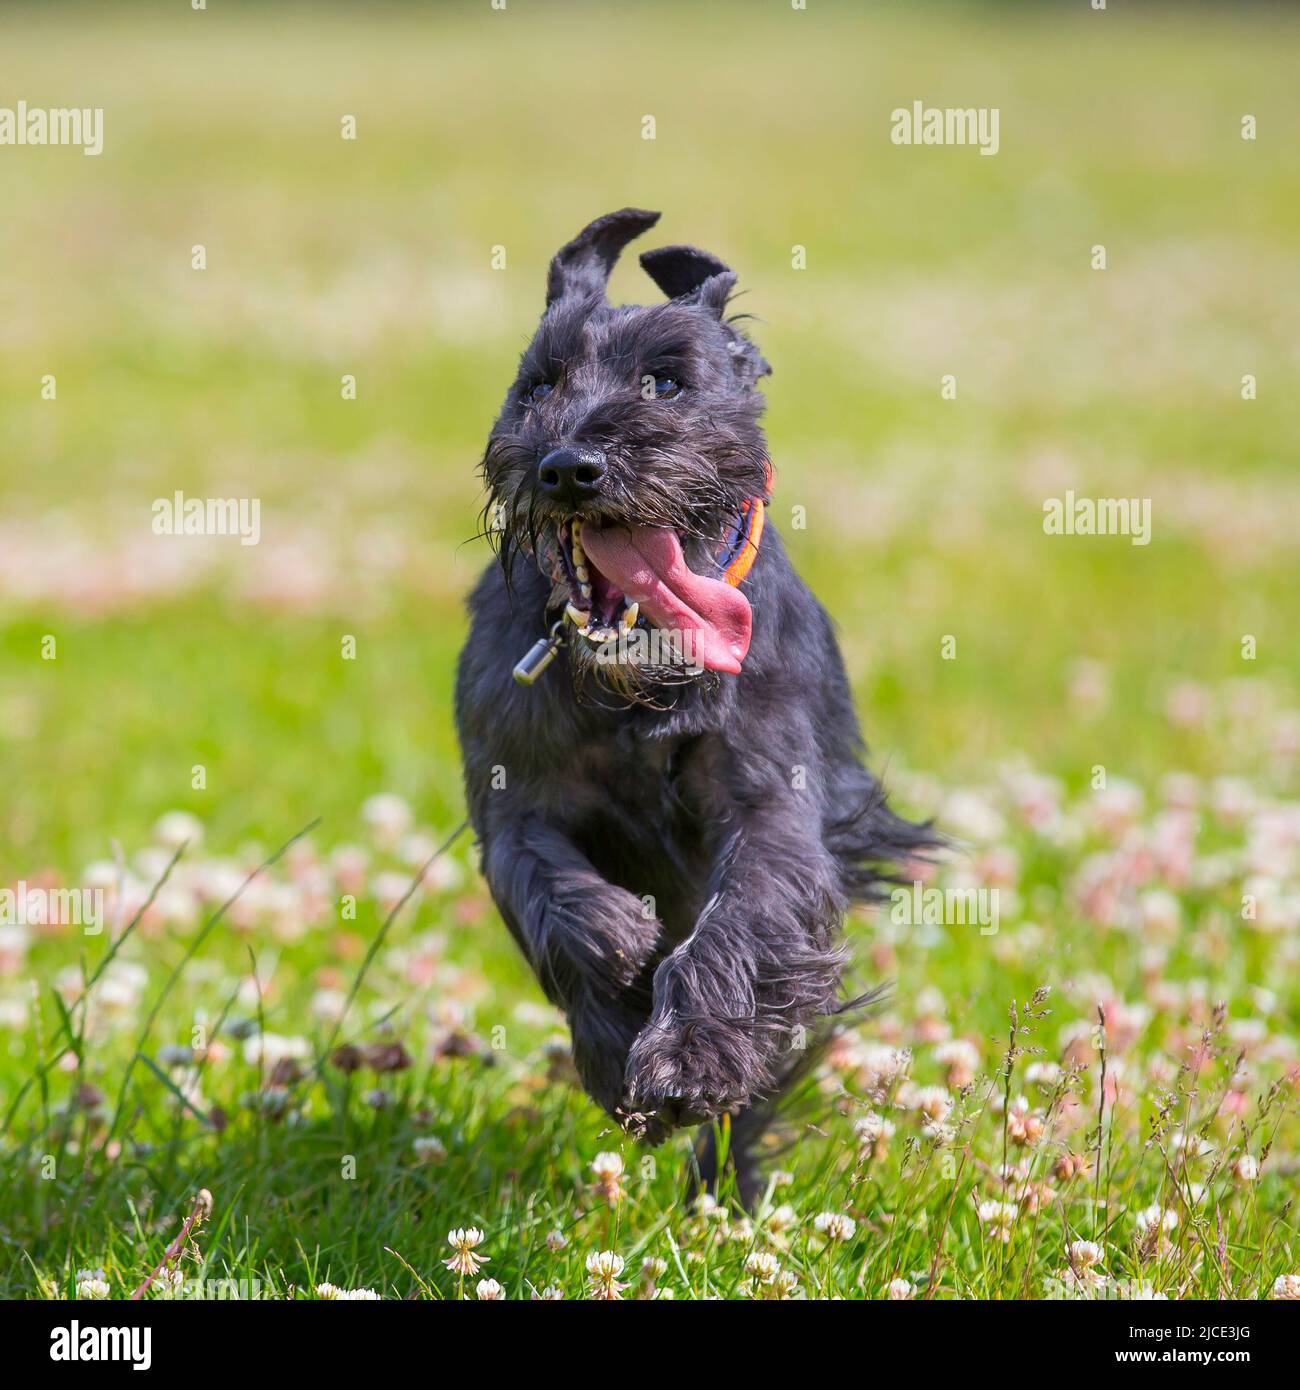 Kidderminster, UK. 12th June. 2022. UK weather: with lovely warm temperatures and sunny conditions, today is a perfect day to play in the park. A happy pet Schnauzer dog is running through the clover flowers in a country park. Credit: Lee Hudson/Alamy Live News Stock Photo